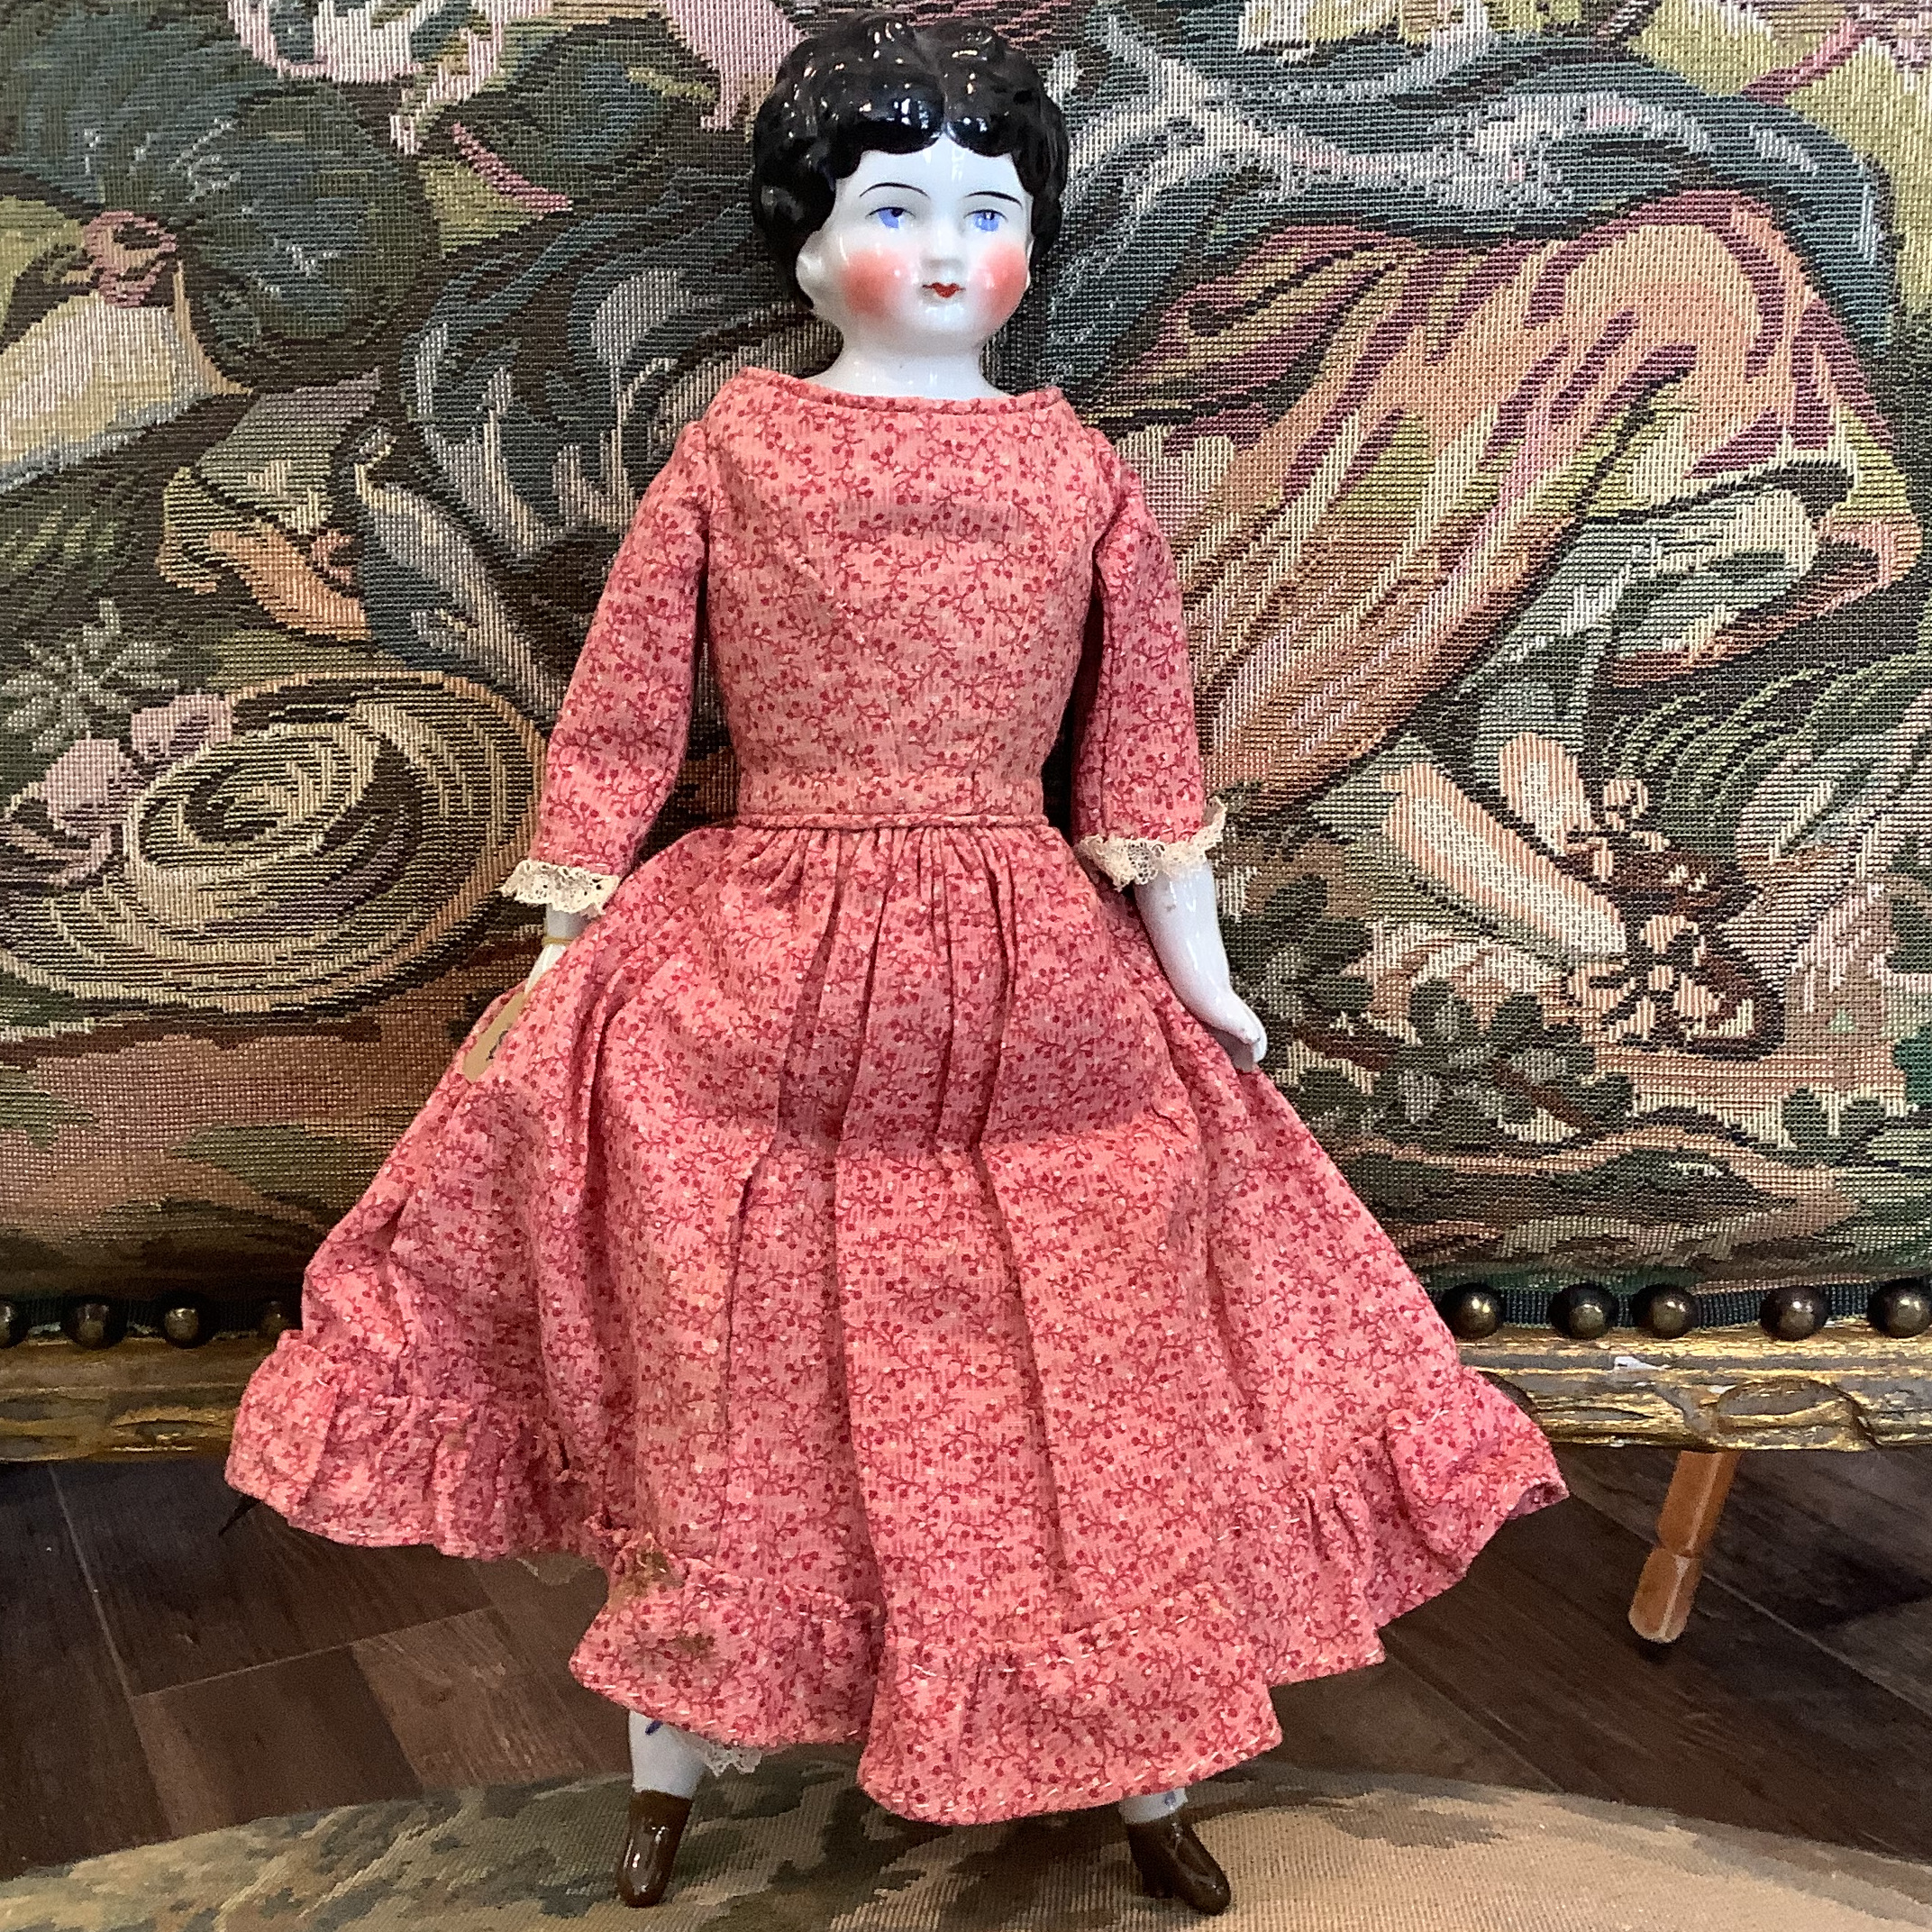 China doll with molded black hair and white skin in pink and red calico dress with tiny flowers